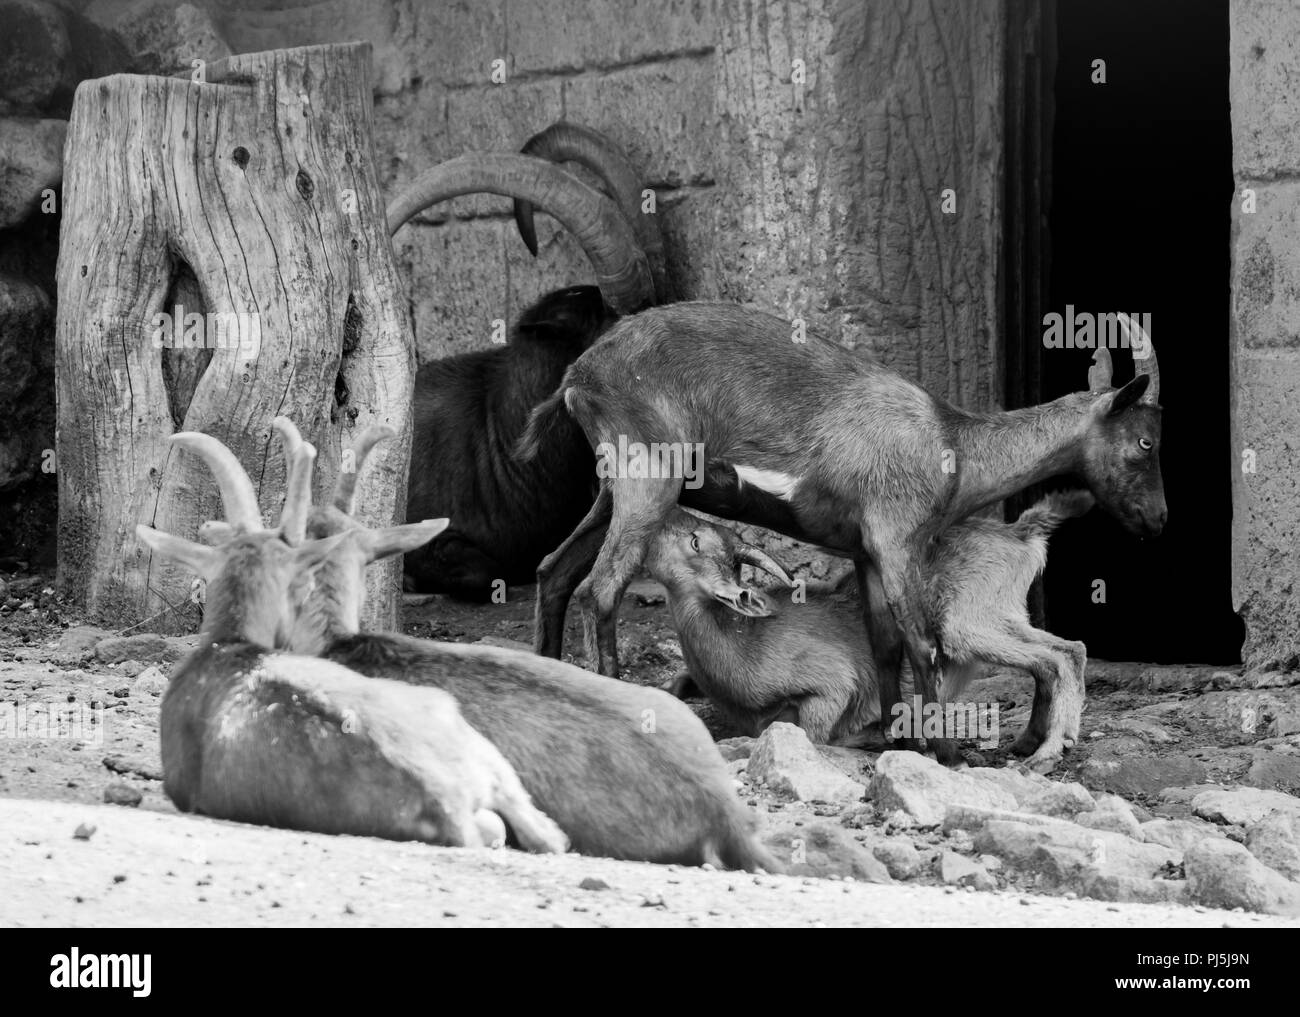 Rome, Italy - The animals of Biopark, a zoological park in the heart of Rome in Villa Borghese. Stock Photo